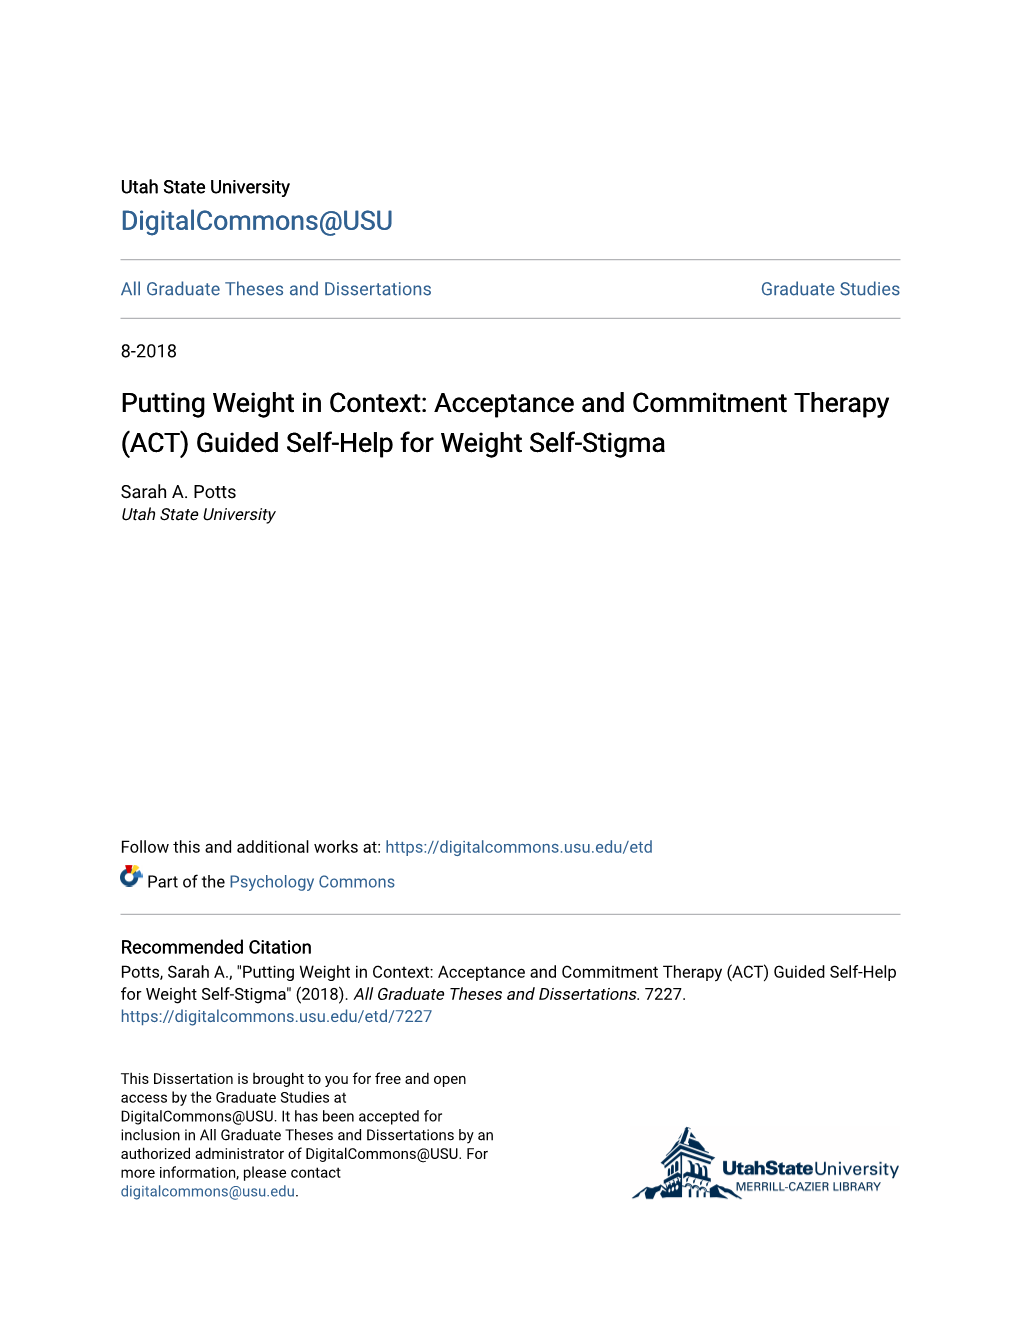 Acceptance and Commitment Therapy (ACT) Guided Self-Help for Weight Self-Stigma